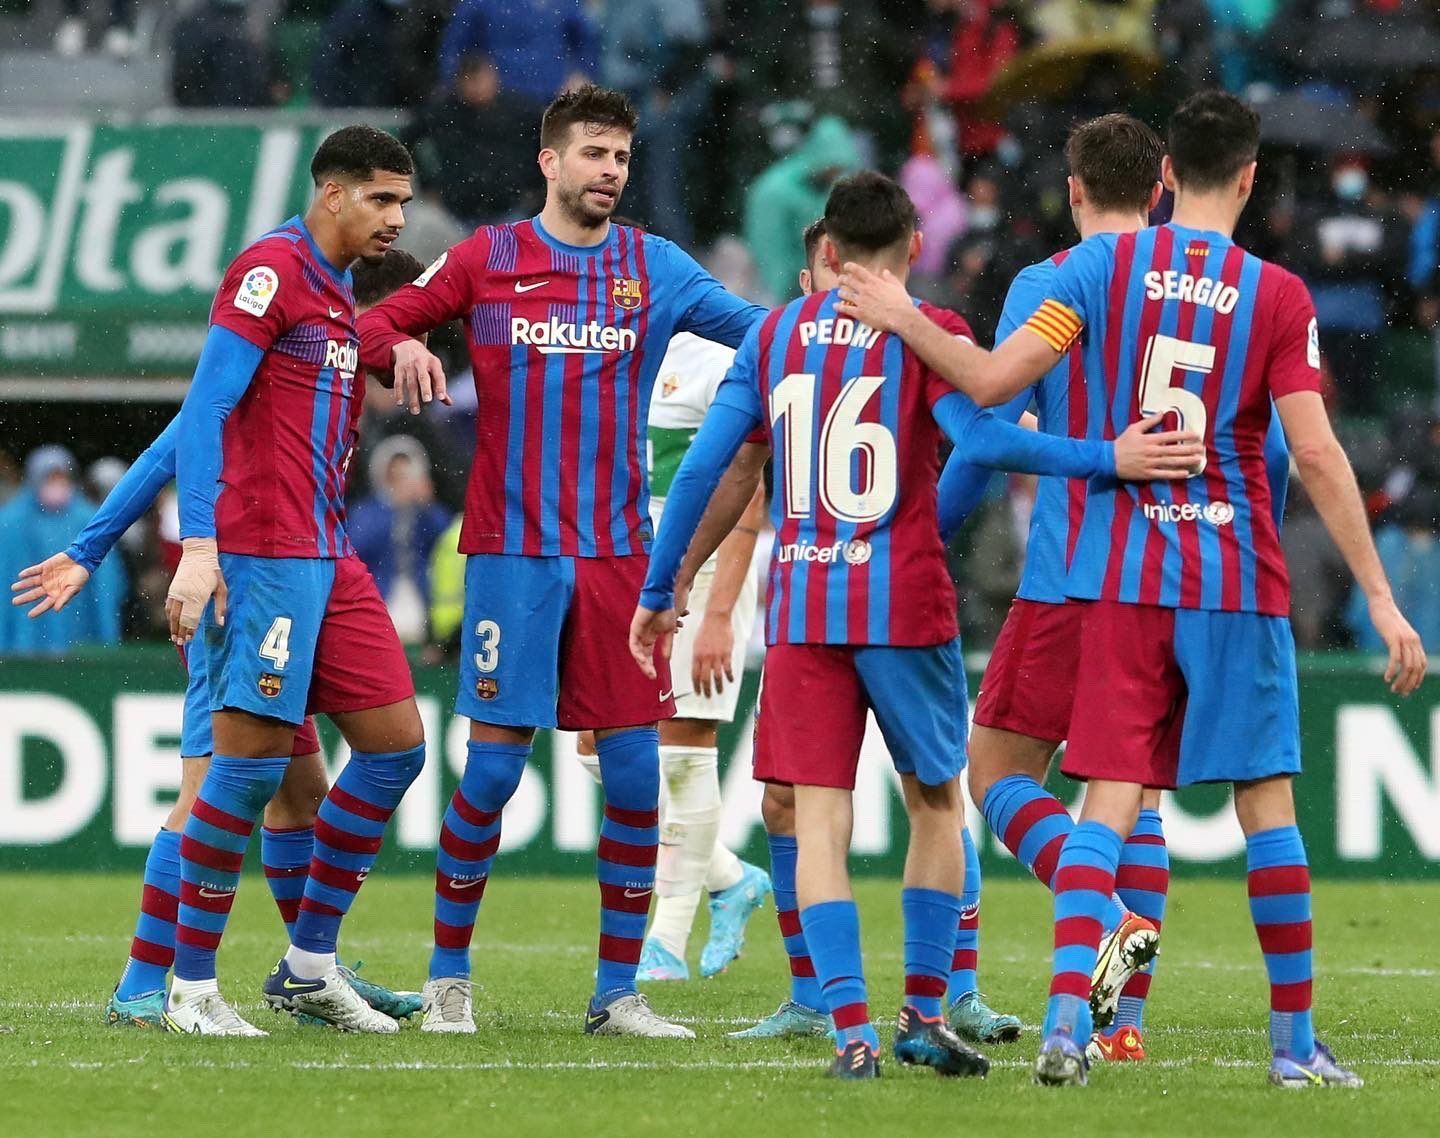 Barcelona defeated Elche to extend their unbeaten run in La Liga to 11 games.